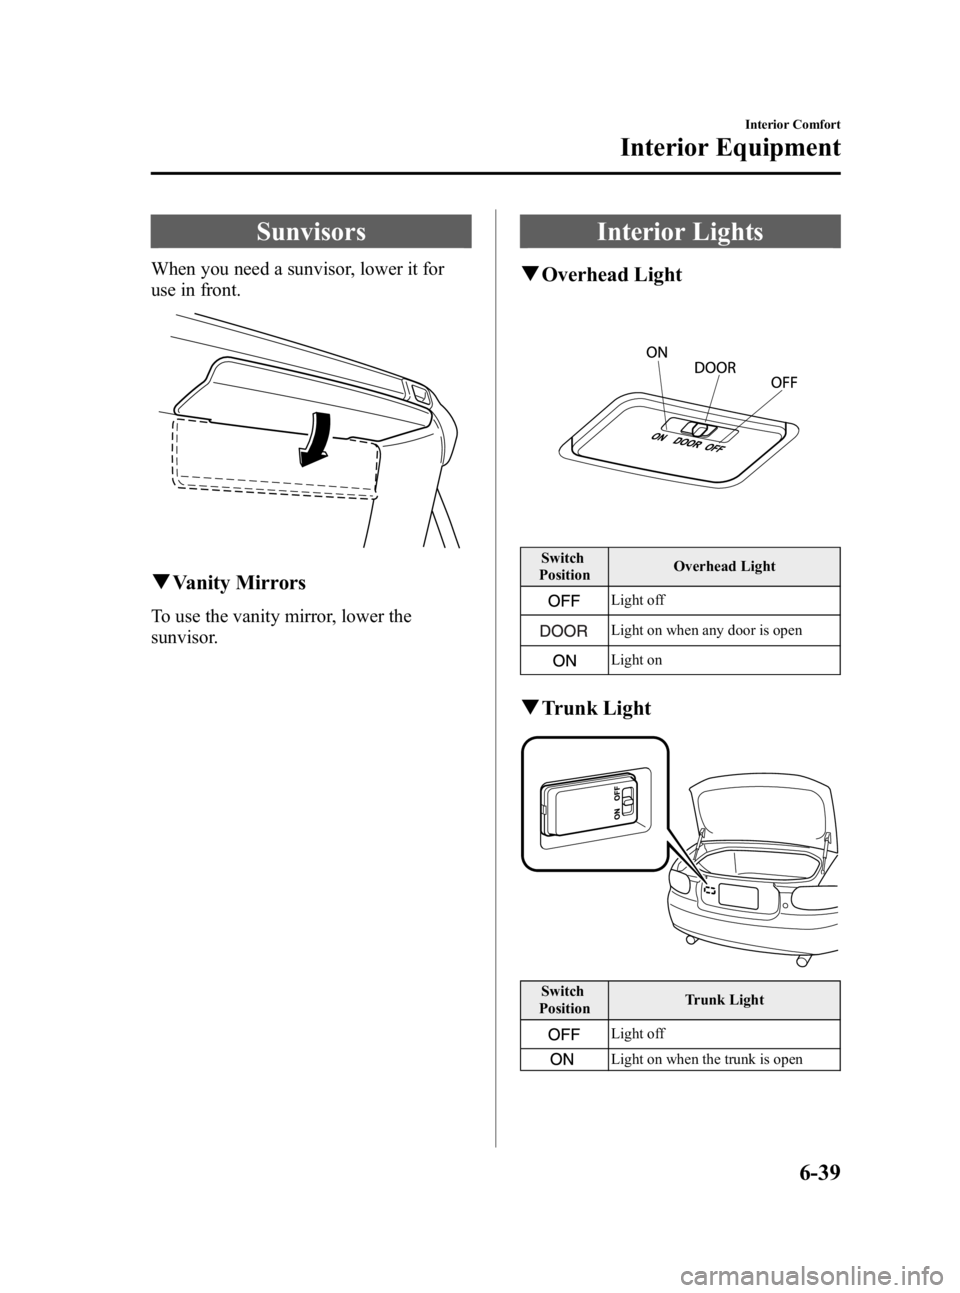 MAZDA MODEL MX-5 MIATA 2006  Owners Manual Black plate (233,1)
Sunvisors
When you need a sunvisor, lower it for
use in front.
qVanity Mirrors
To use the vanity mirror, lower the
sunvisor.
Interior Lights
qOverhead Light
Switch
Position Overhea